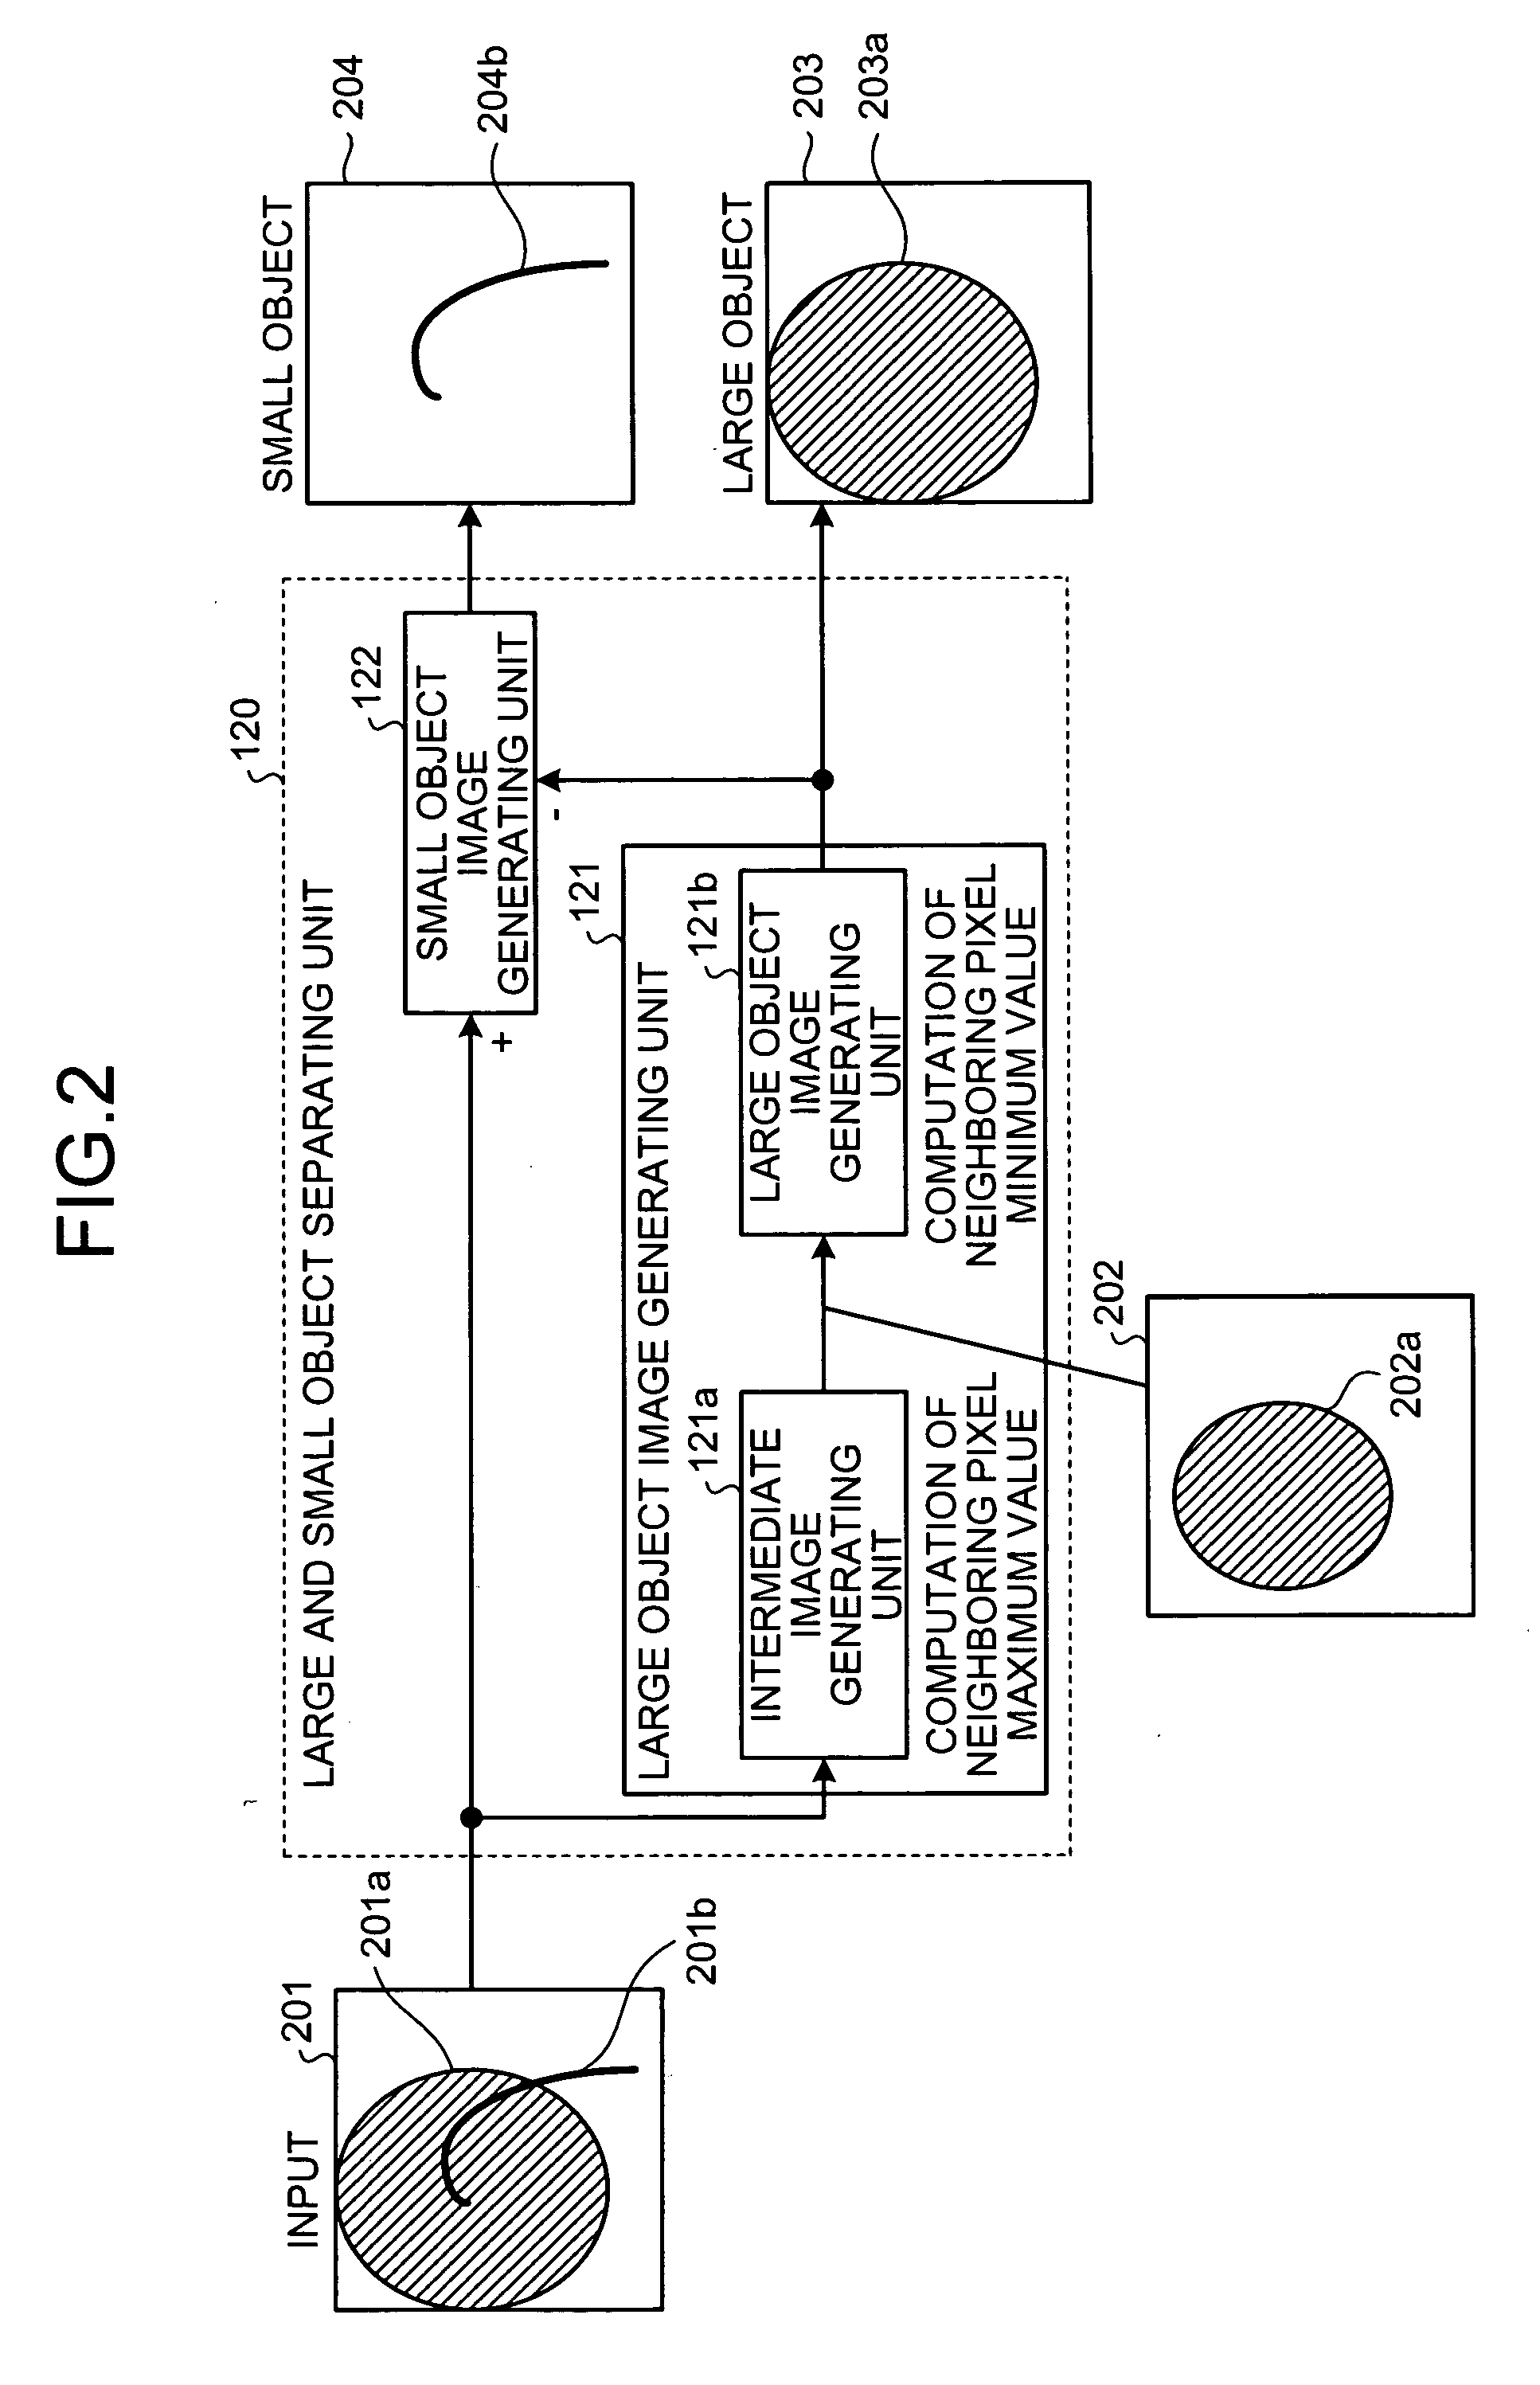 Radiographic image processing apparatus for processing radiographic image taken with radiation, method of radiographic image processing, and computer program product therefor